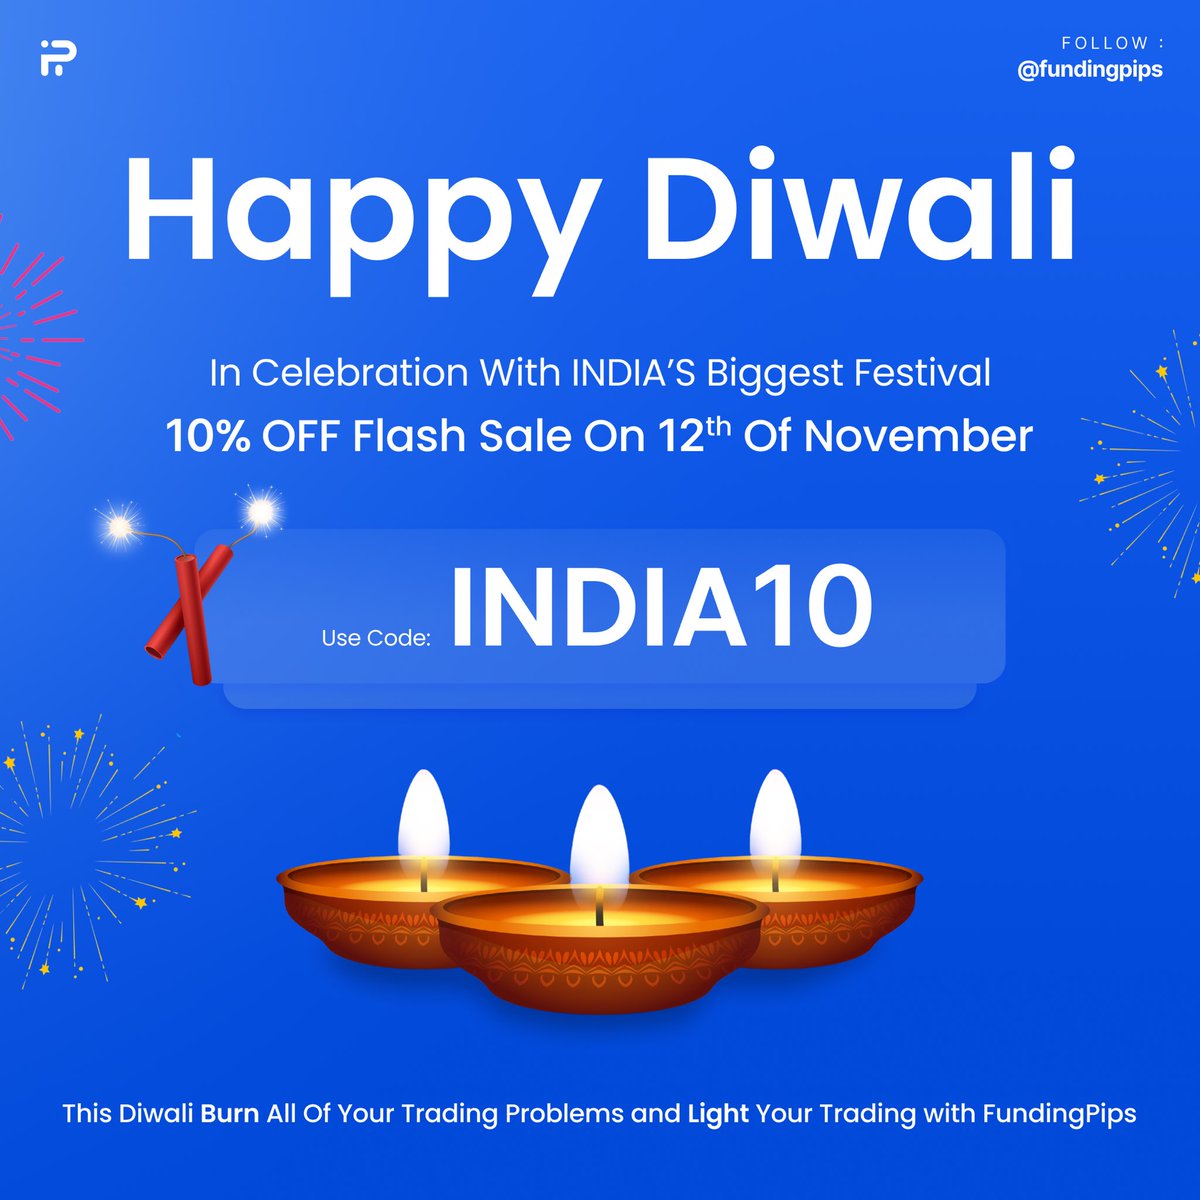 At Funding Pips we like to celebrate every country’s biggest occasion and celebration!! Happy Diwali India!! Flash sale of 10% discount applied on all accounts today the 12th of November till 23:59 UTC !! Use the code “INDIA10” Fundingpips.com #Fundingpips